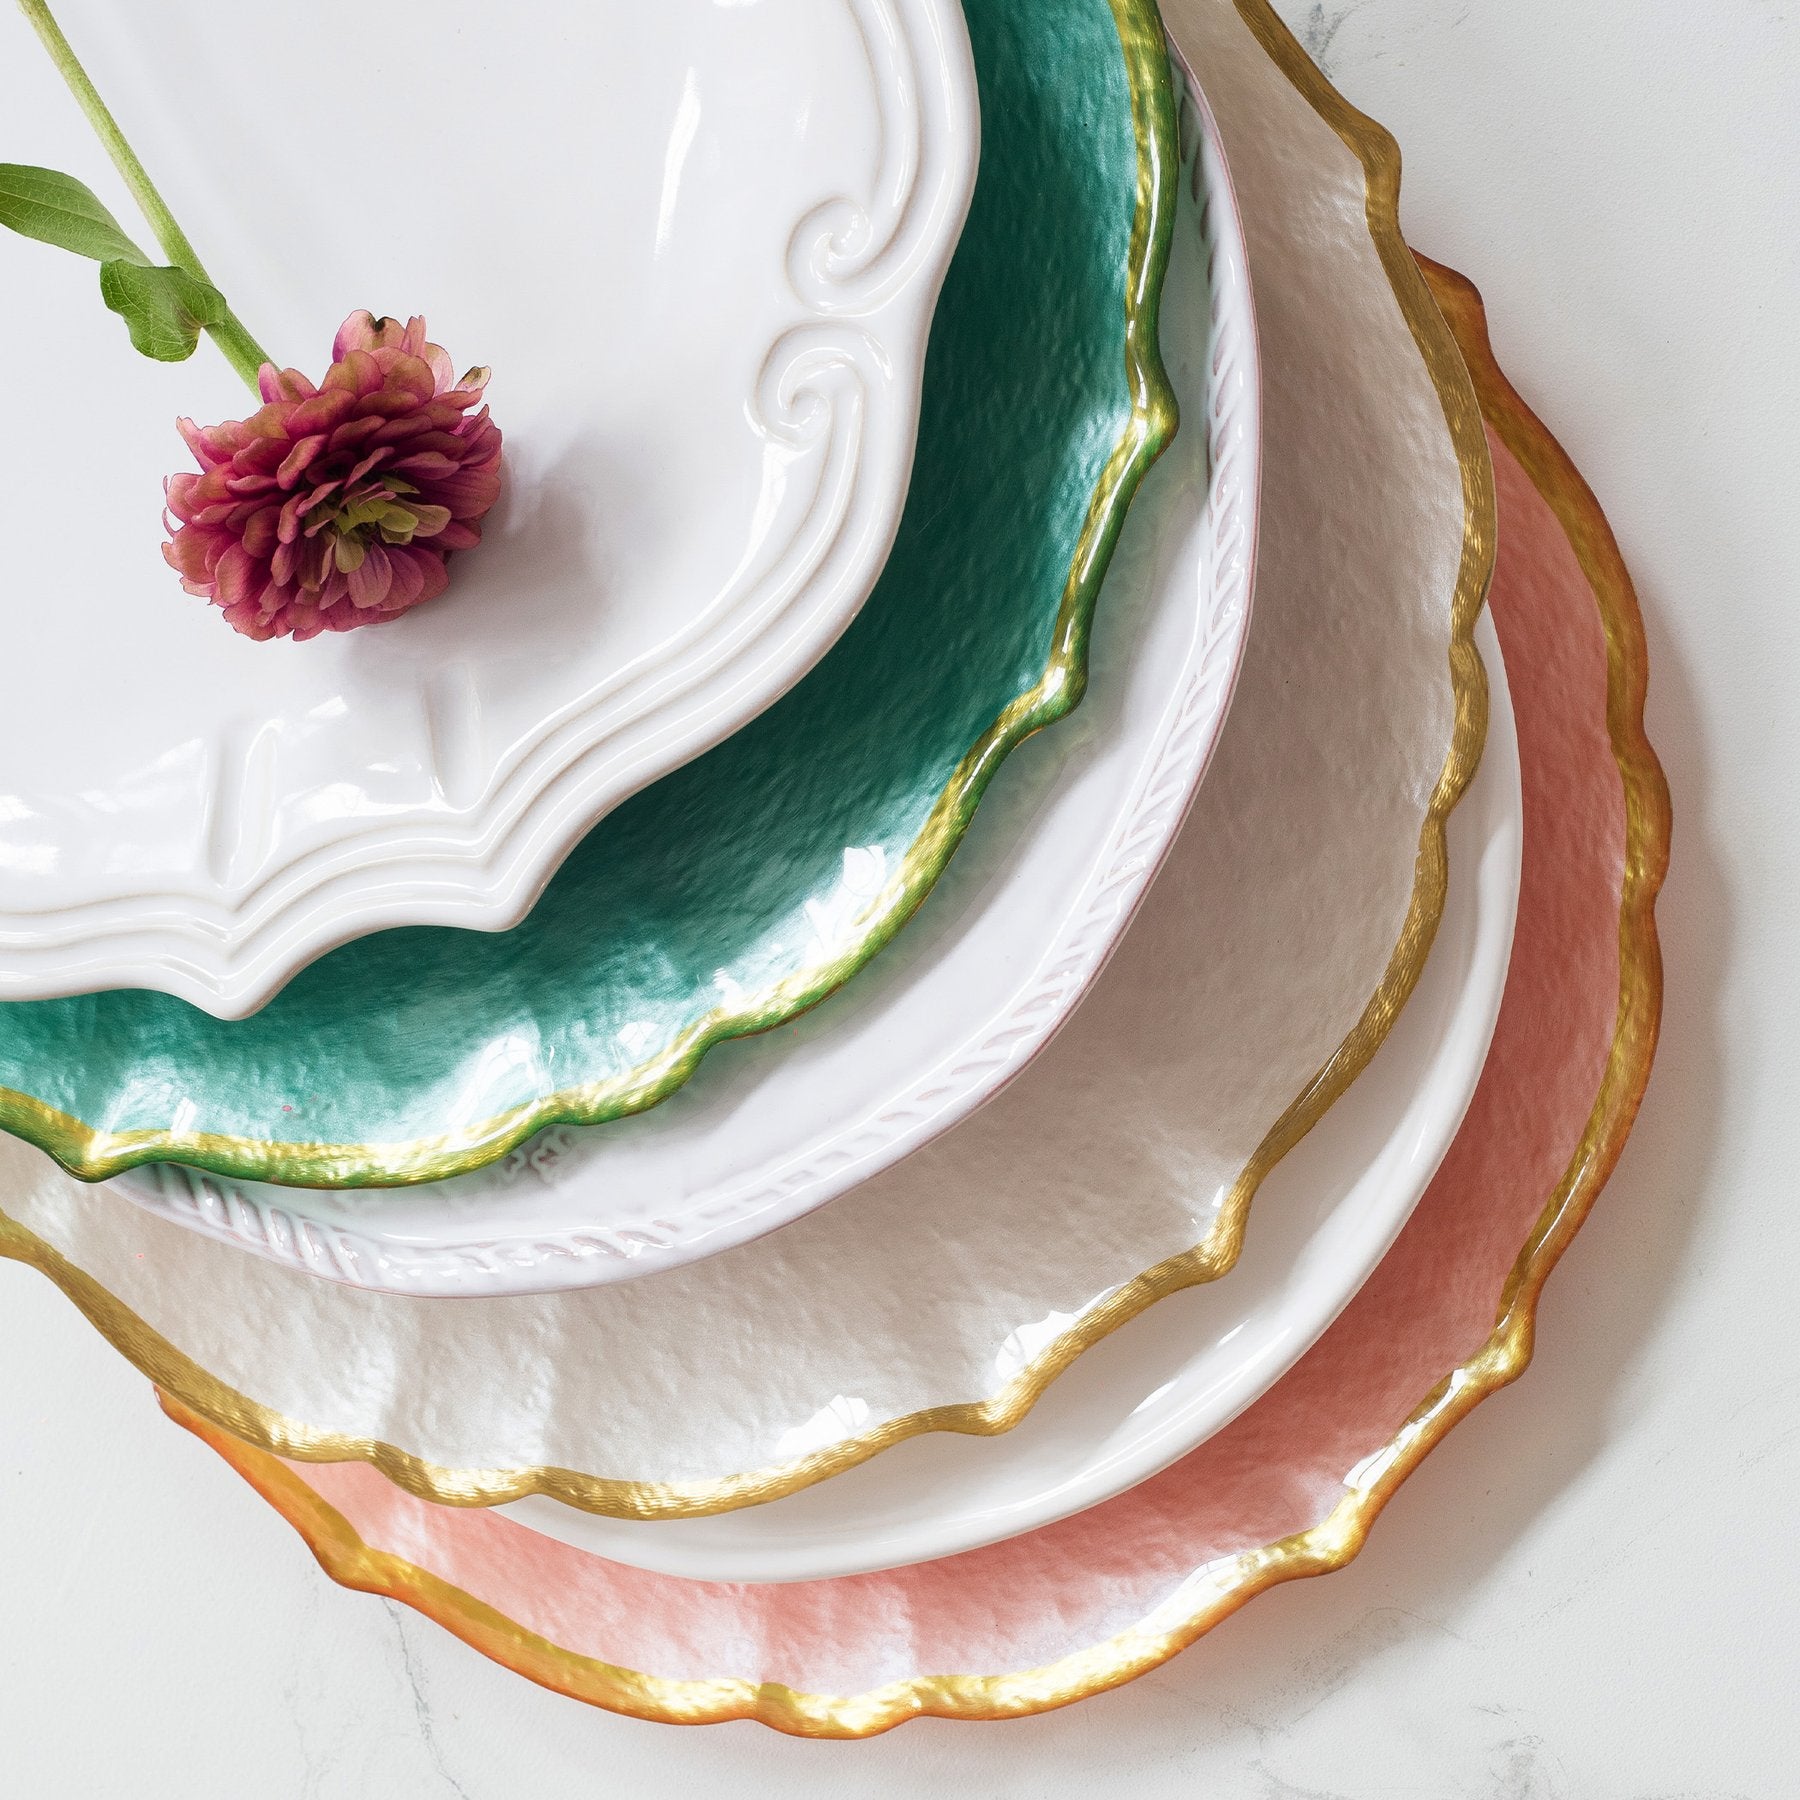 Baroque Glass White Service Plate/Charger